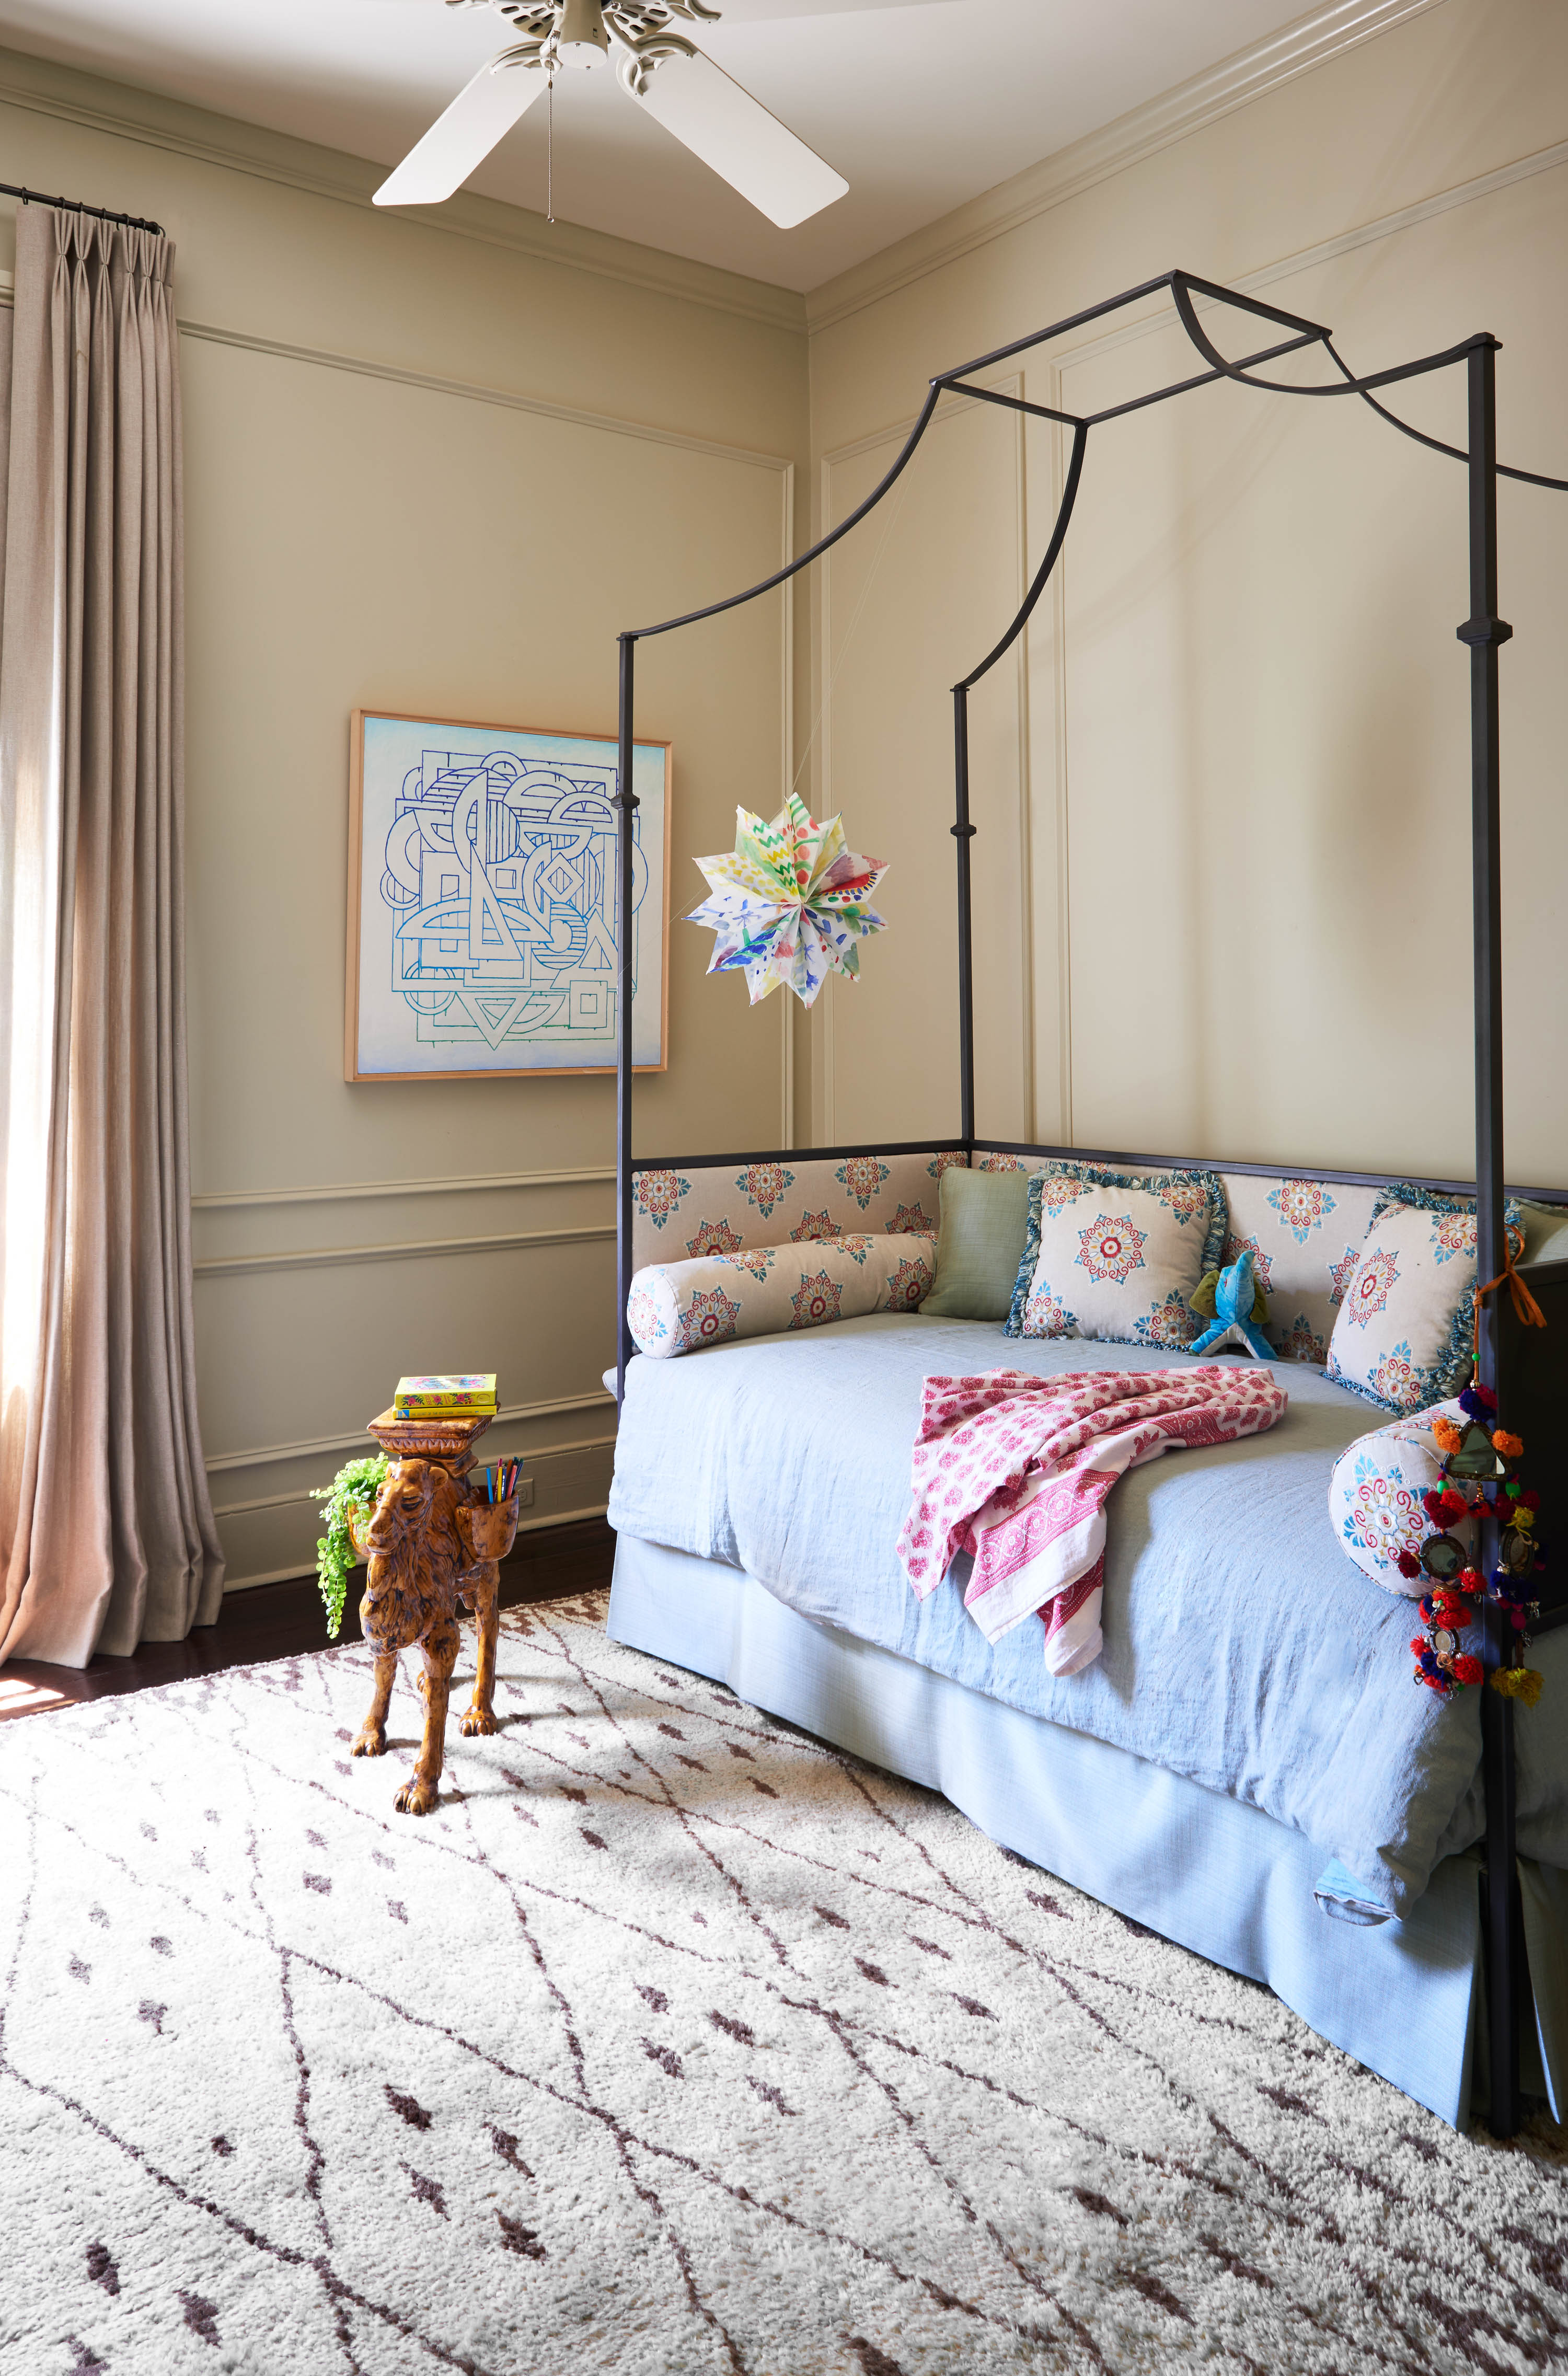 Childs bedroom in Garden and Gun Magazine by Alison Gootee photography